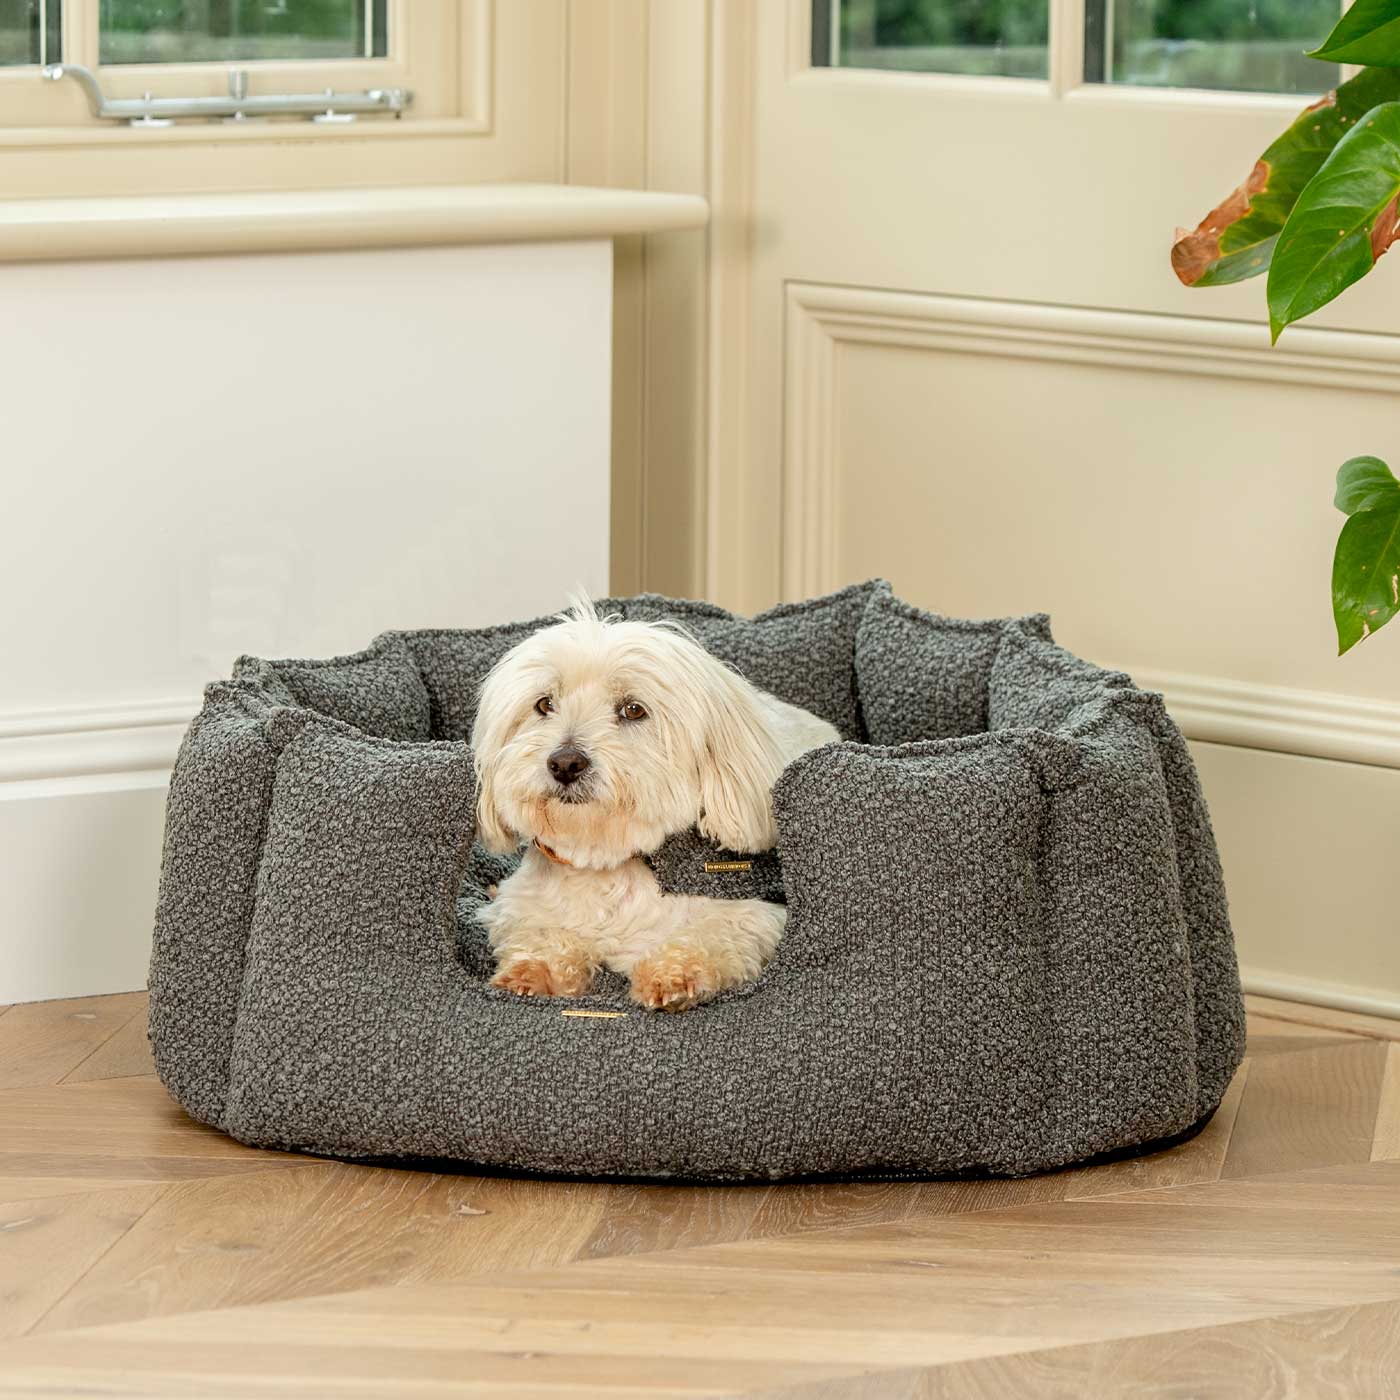 [color:granite boucle] Discover Our Luxurious High Wall Bed For Dogs, Featuring inner pillow with plush teddy fleece on one side To Craft The Perfect Dogs Bed In Stunning Granite Bouclé! Available To Personalize Now at Lords & Labradors US